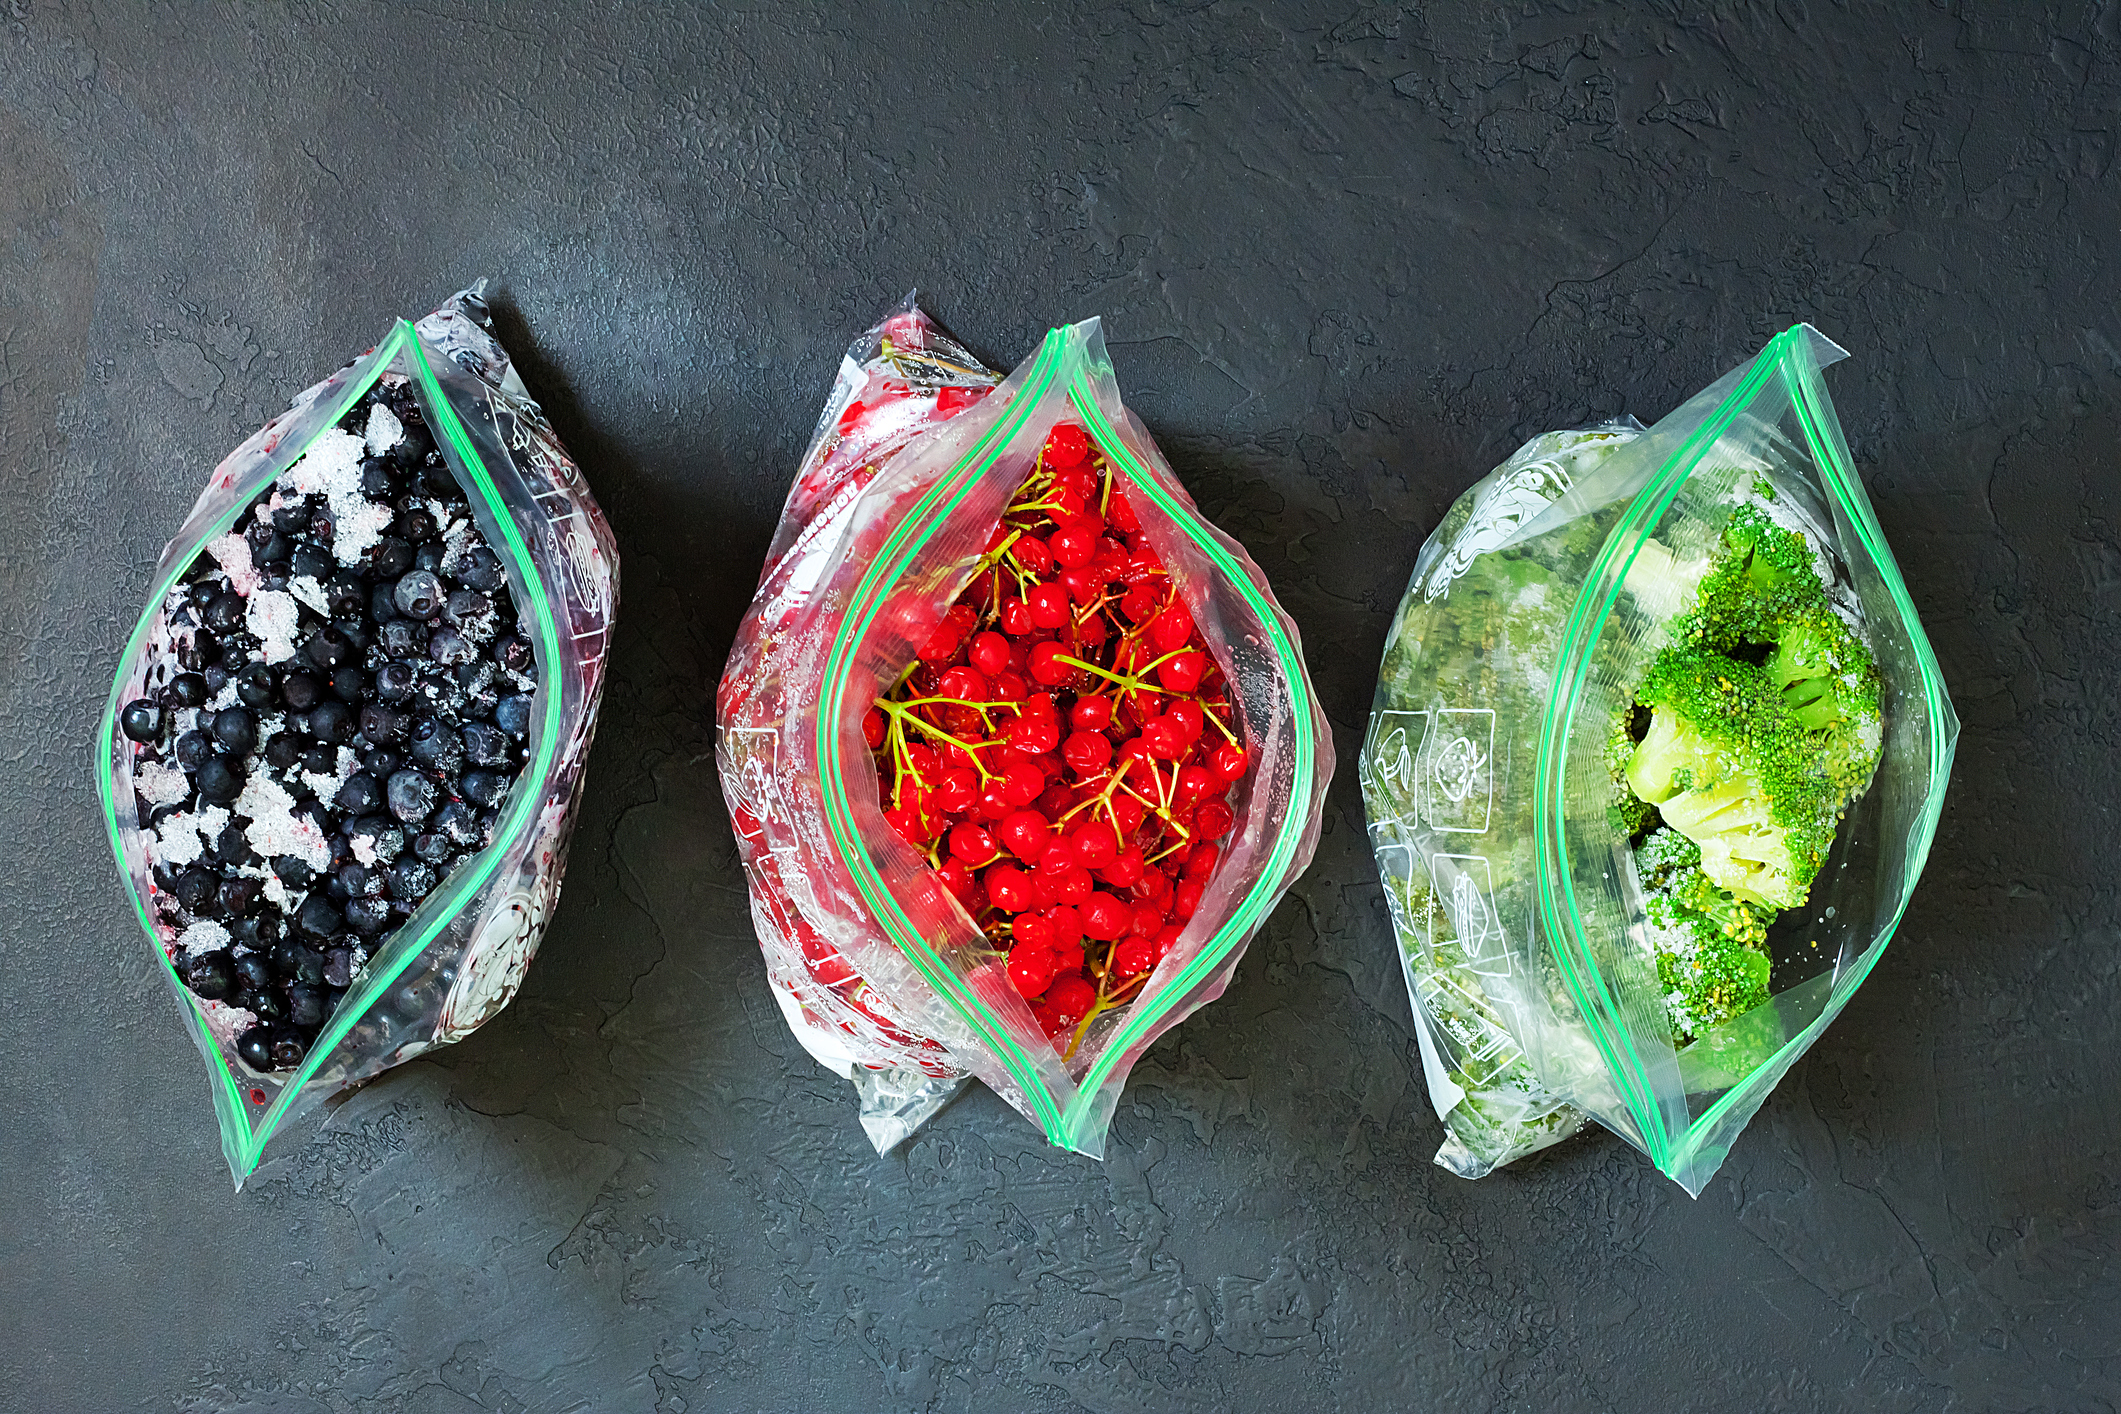 Three bags of frozen blueberries, red currants and broccoli, fresh from the freezer